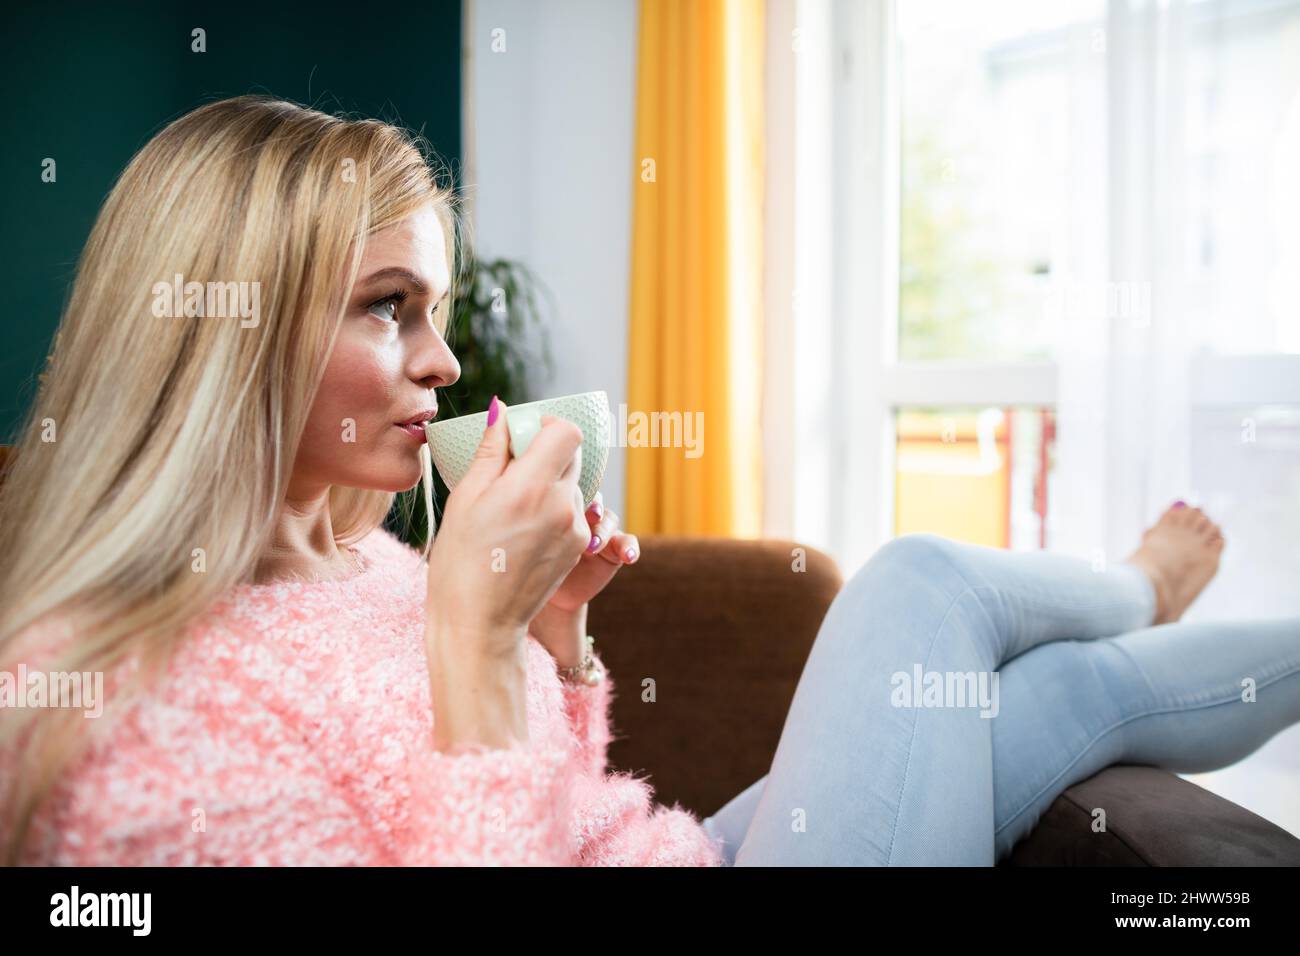 A young woman drinks coffee while sitting in the living room. Stock Photo